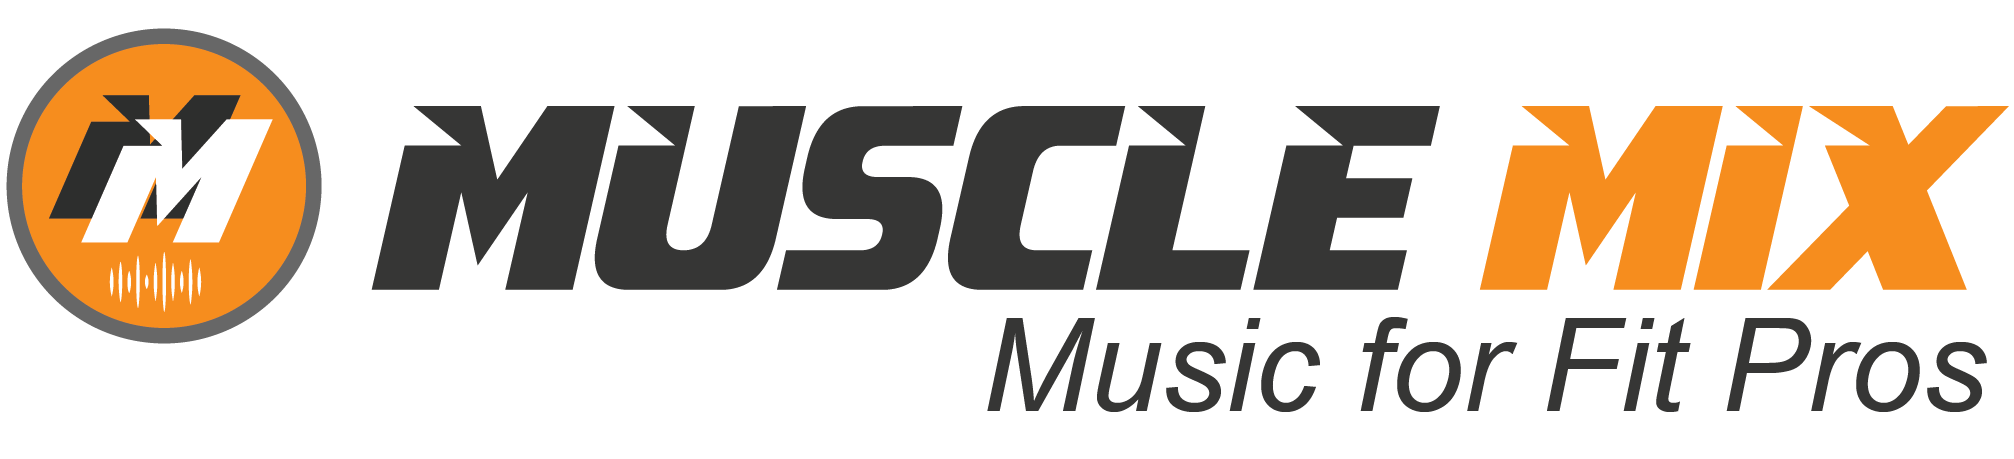 Muscle Mix Music Coupon Codes